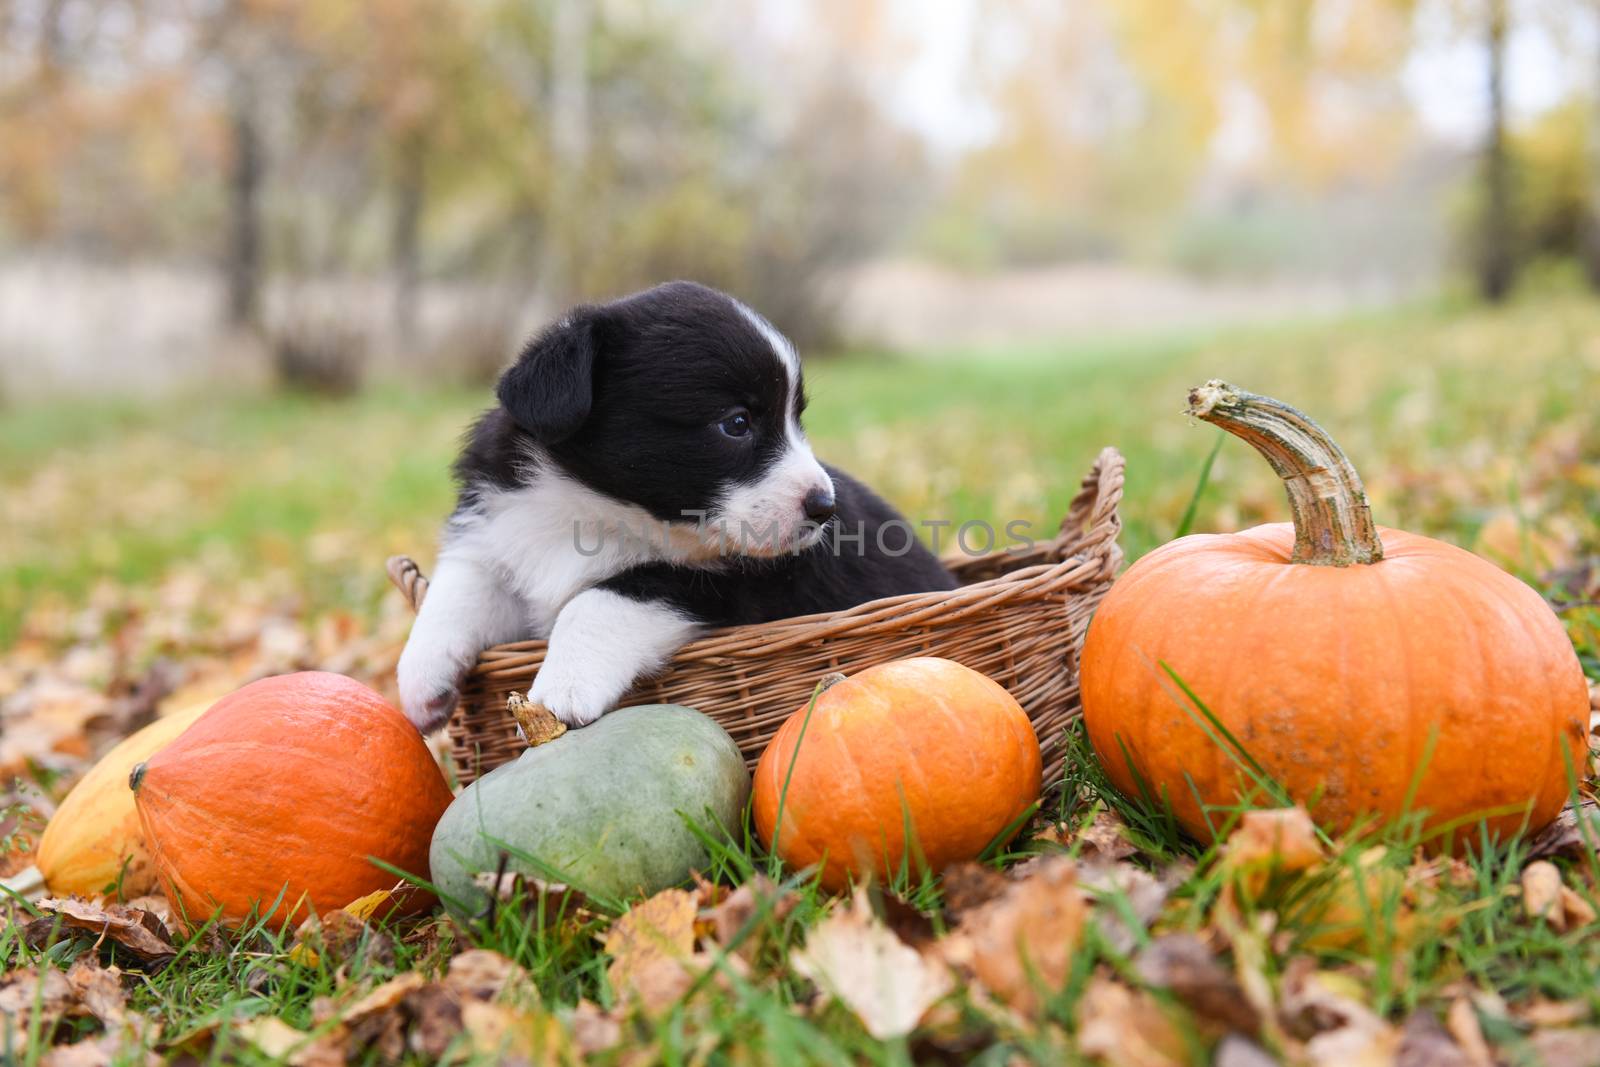 corgi puppy dog with a pumpkin on an autumn background by infinityyy